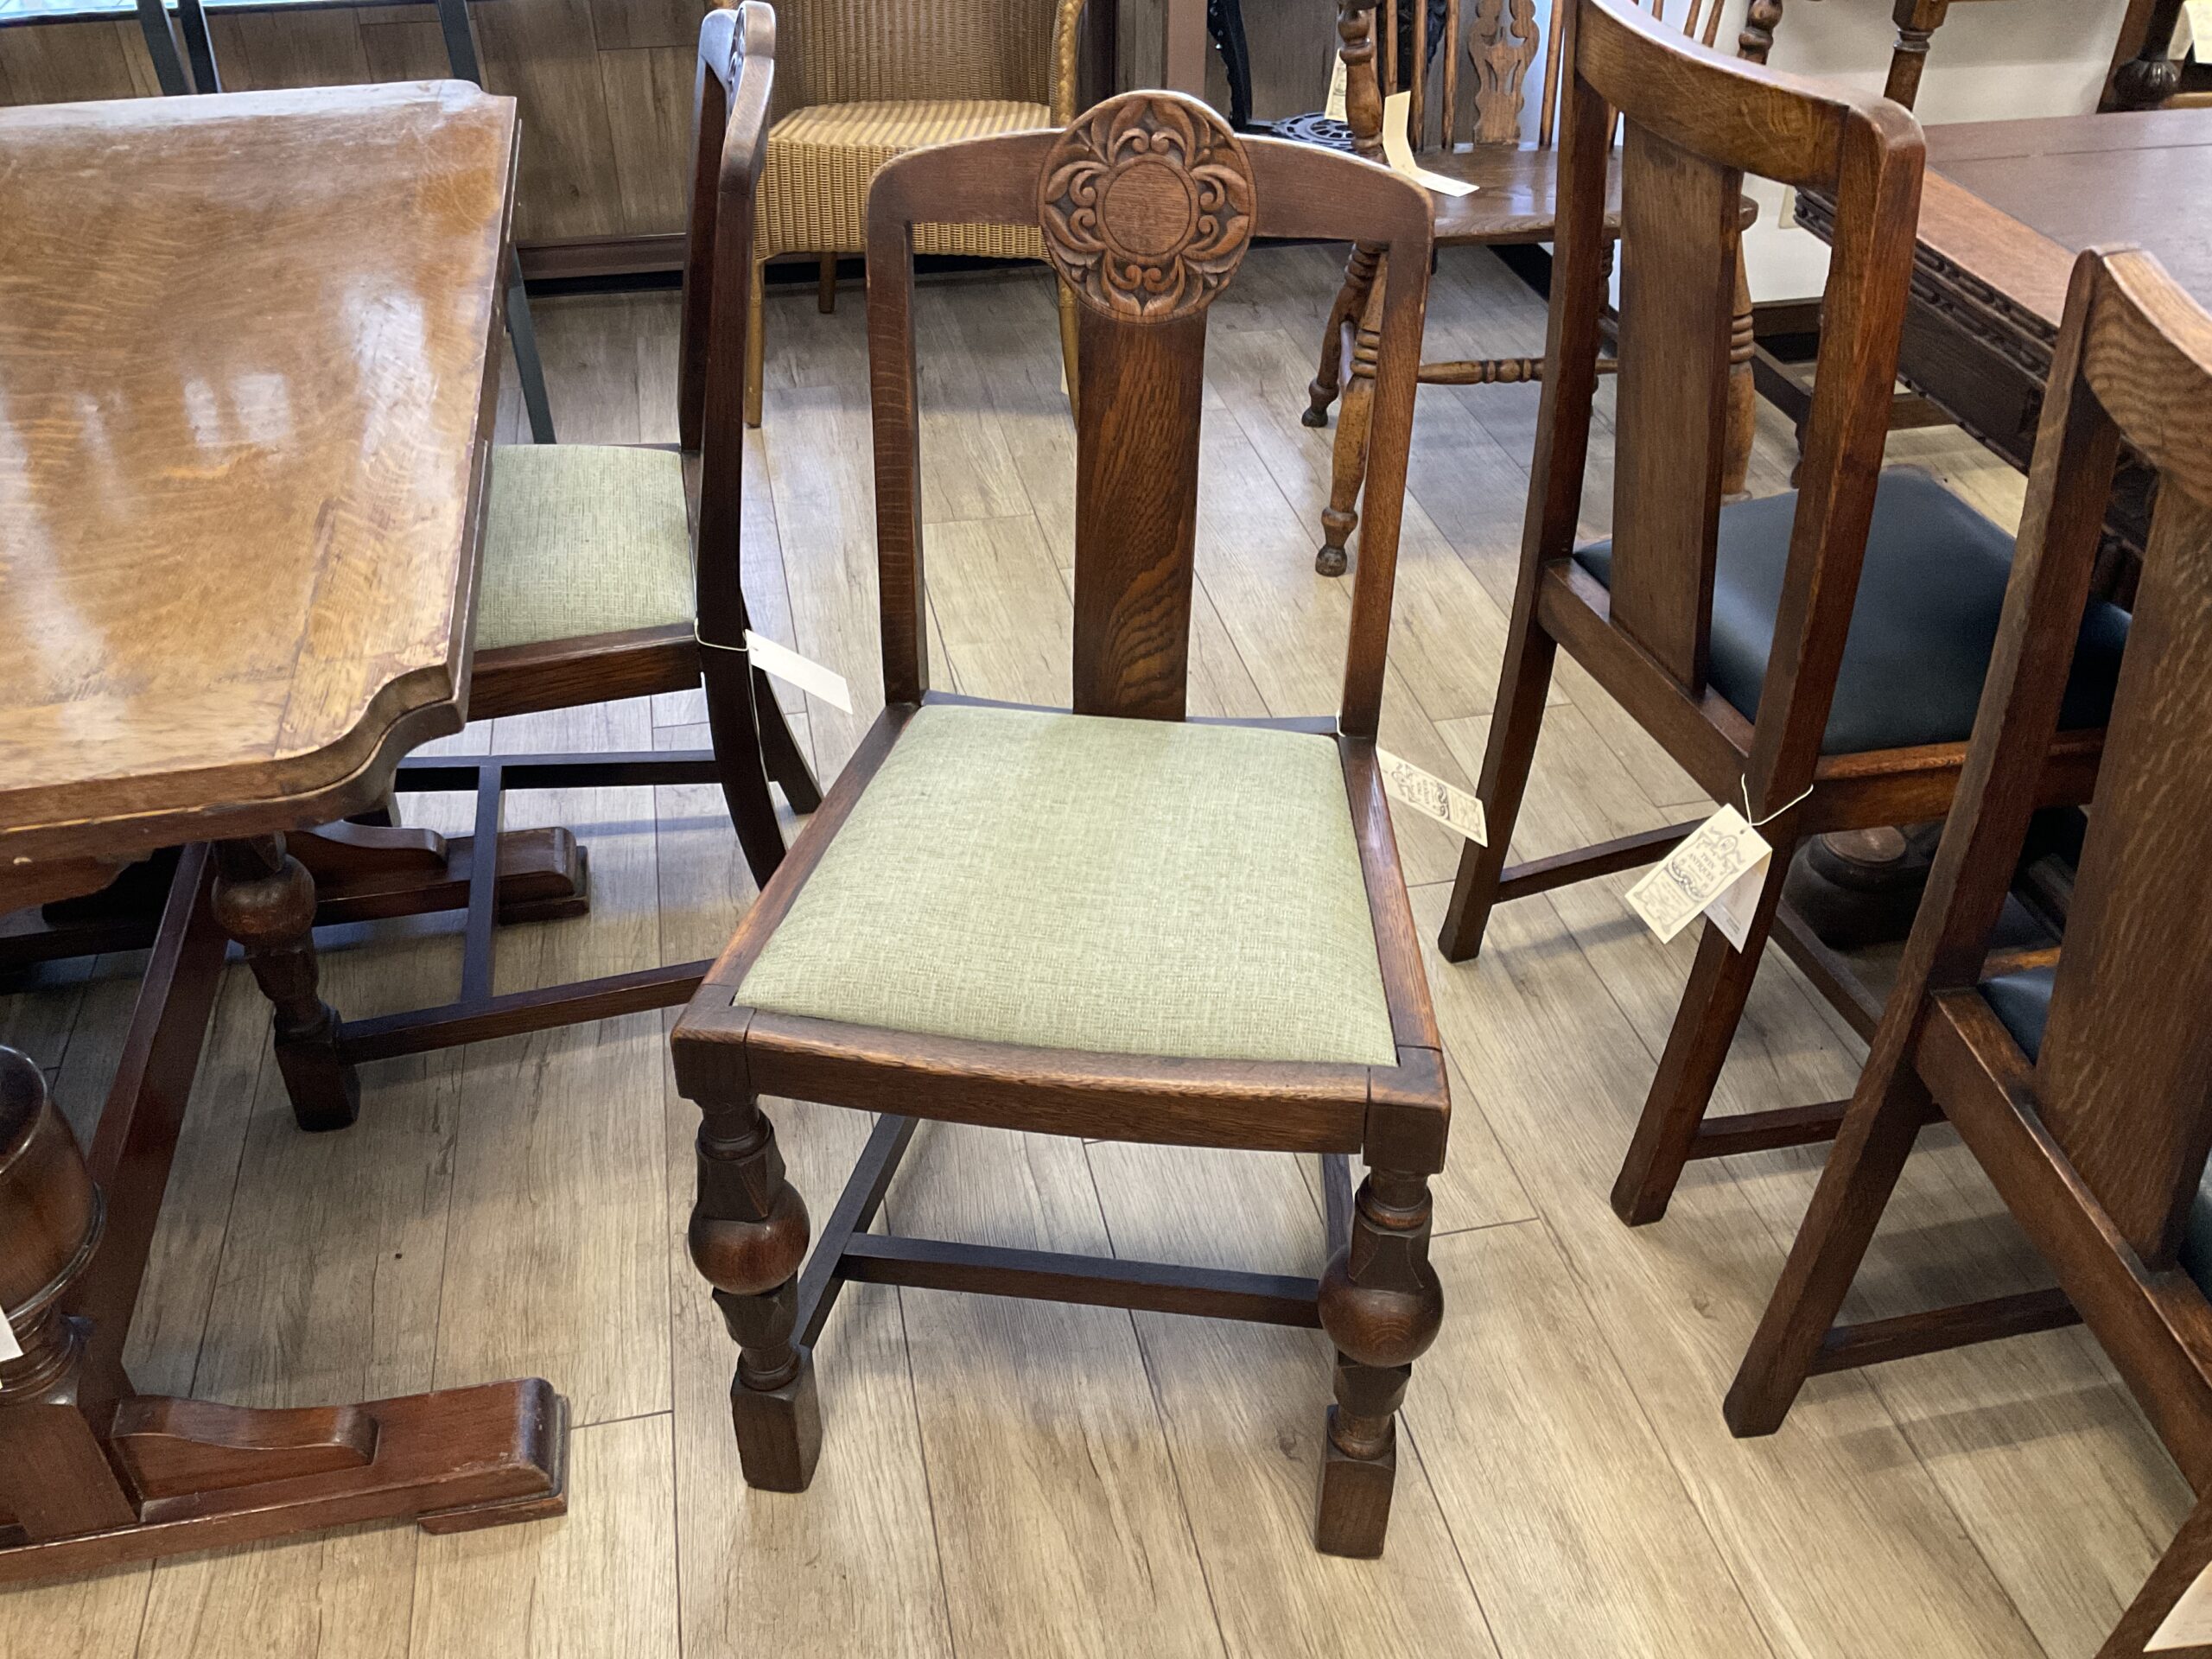 Set of 4 Chairs/21030101025